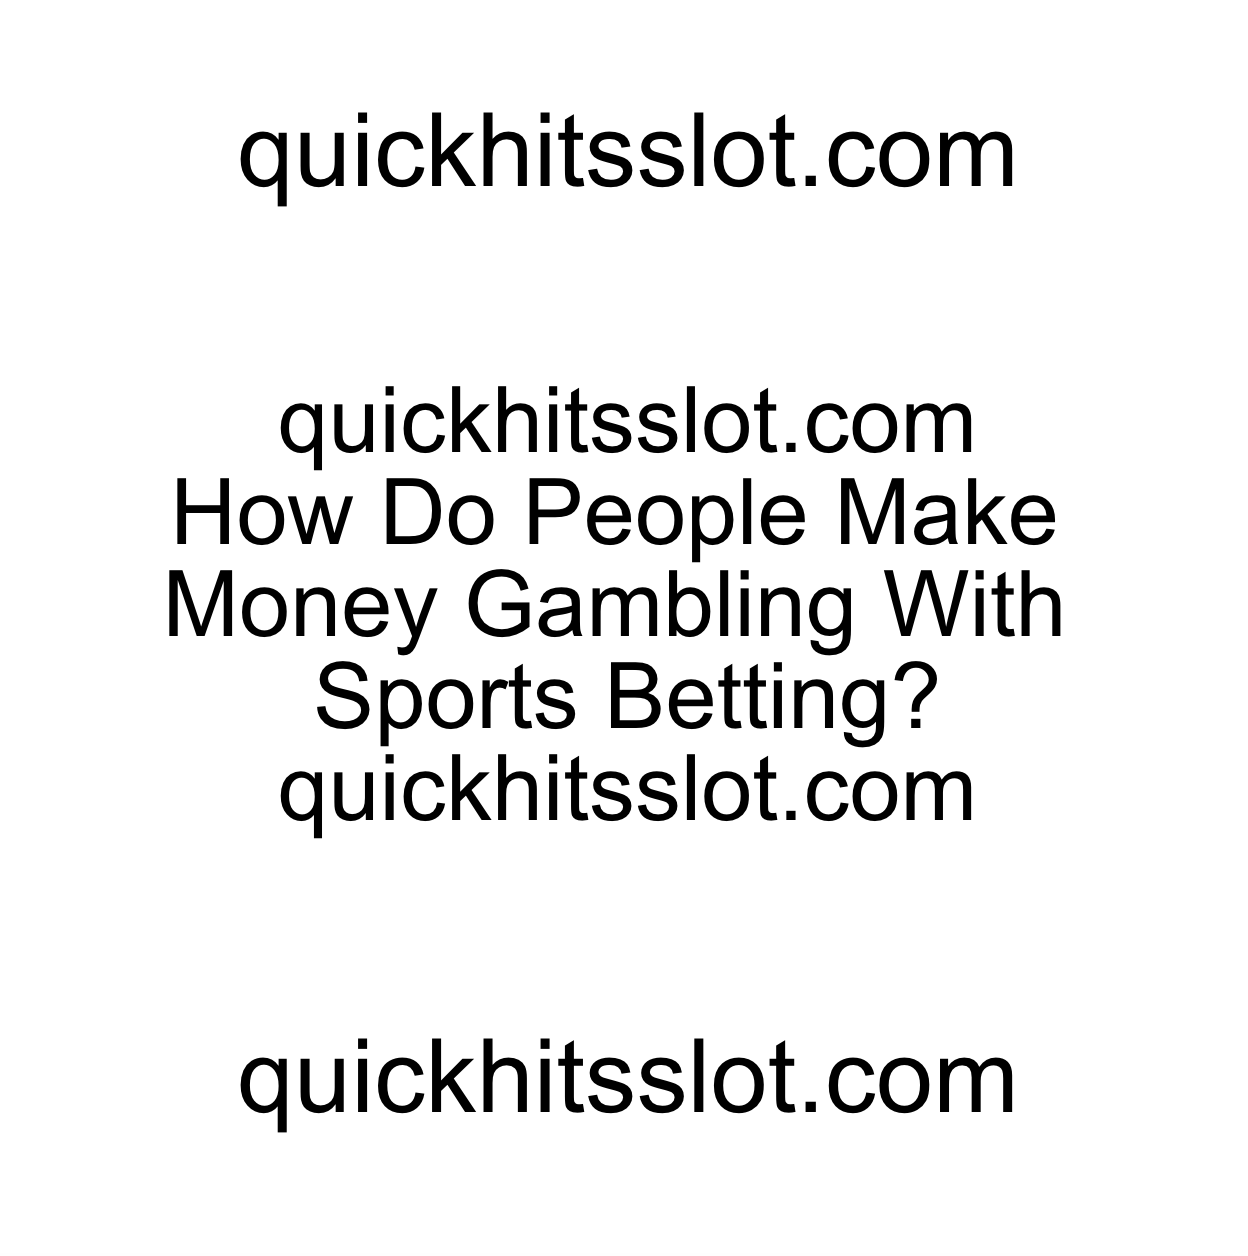 How Do People Make Money Gambling With Sports Betting? quickhitsslot.com